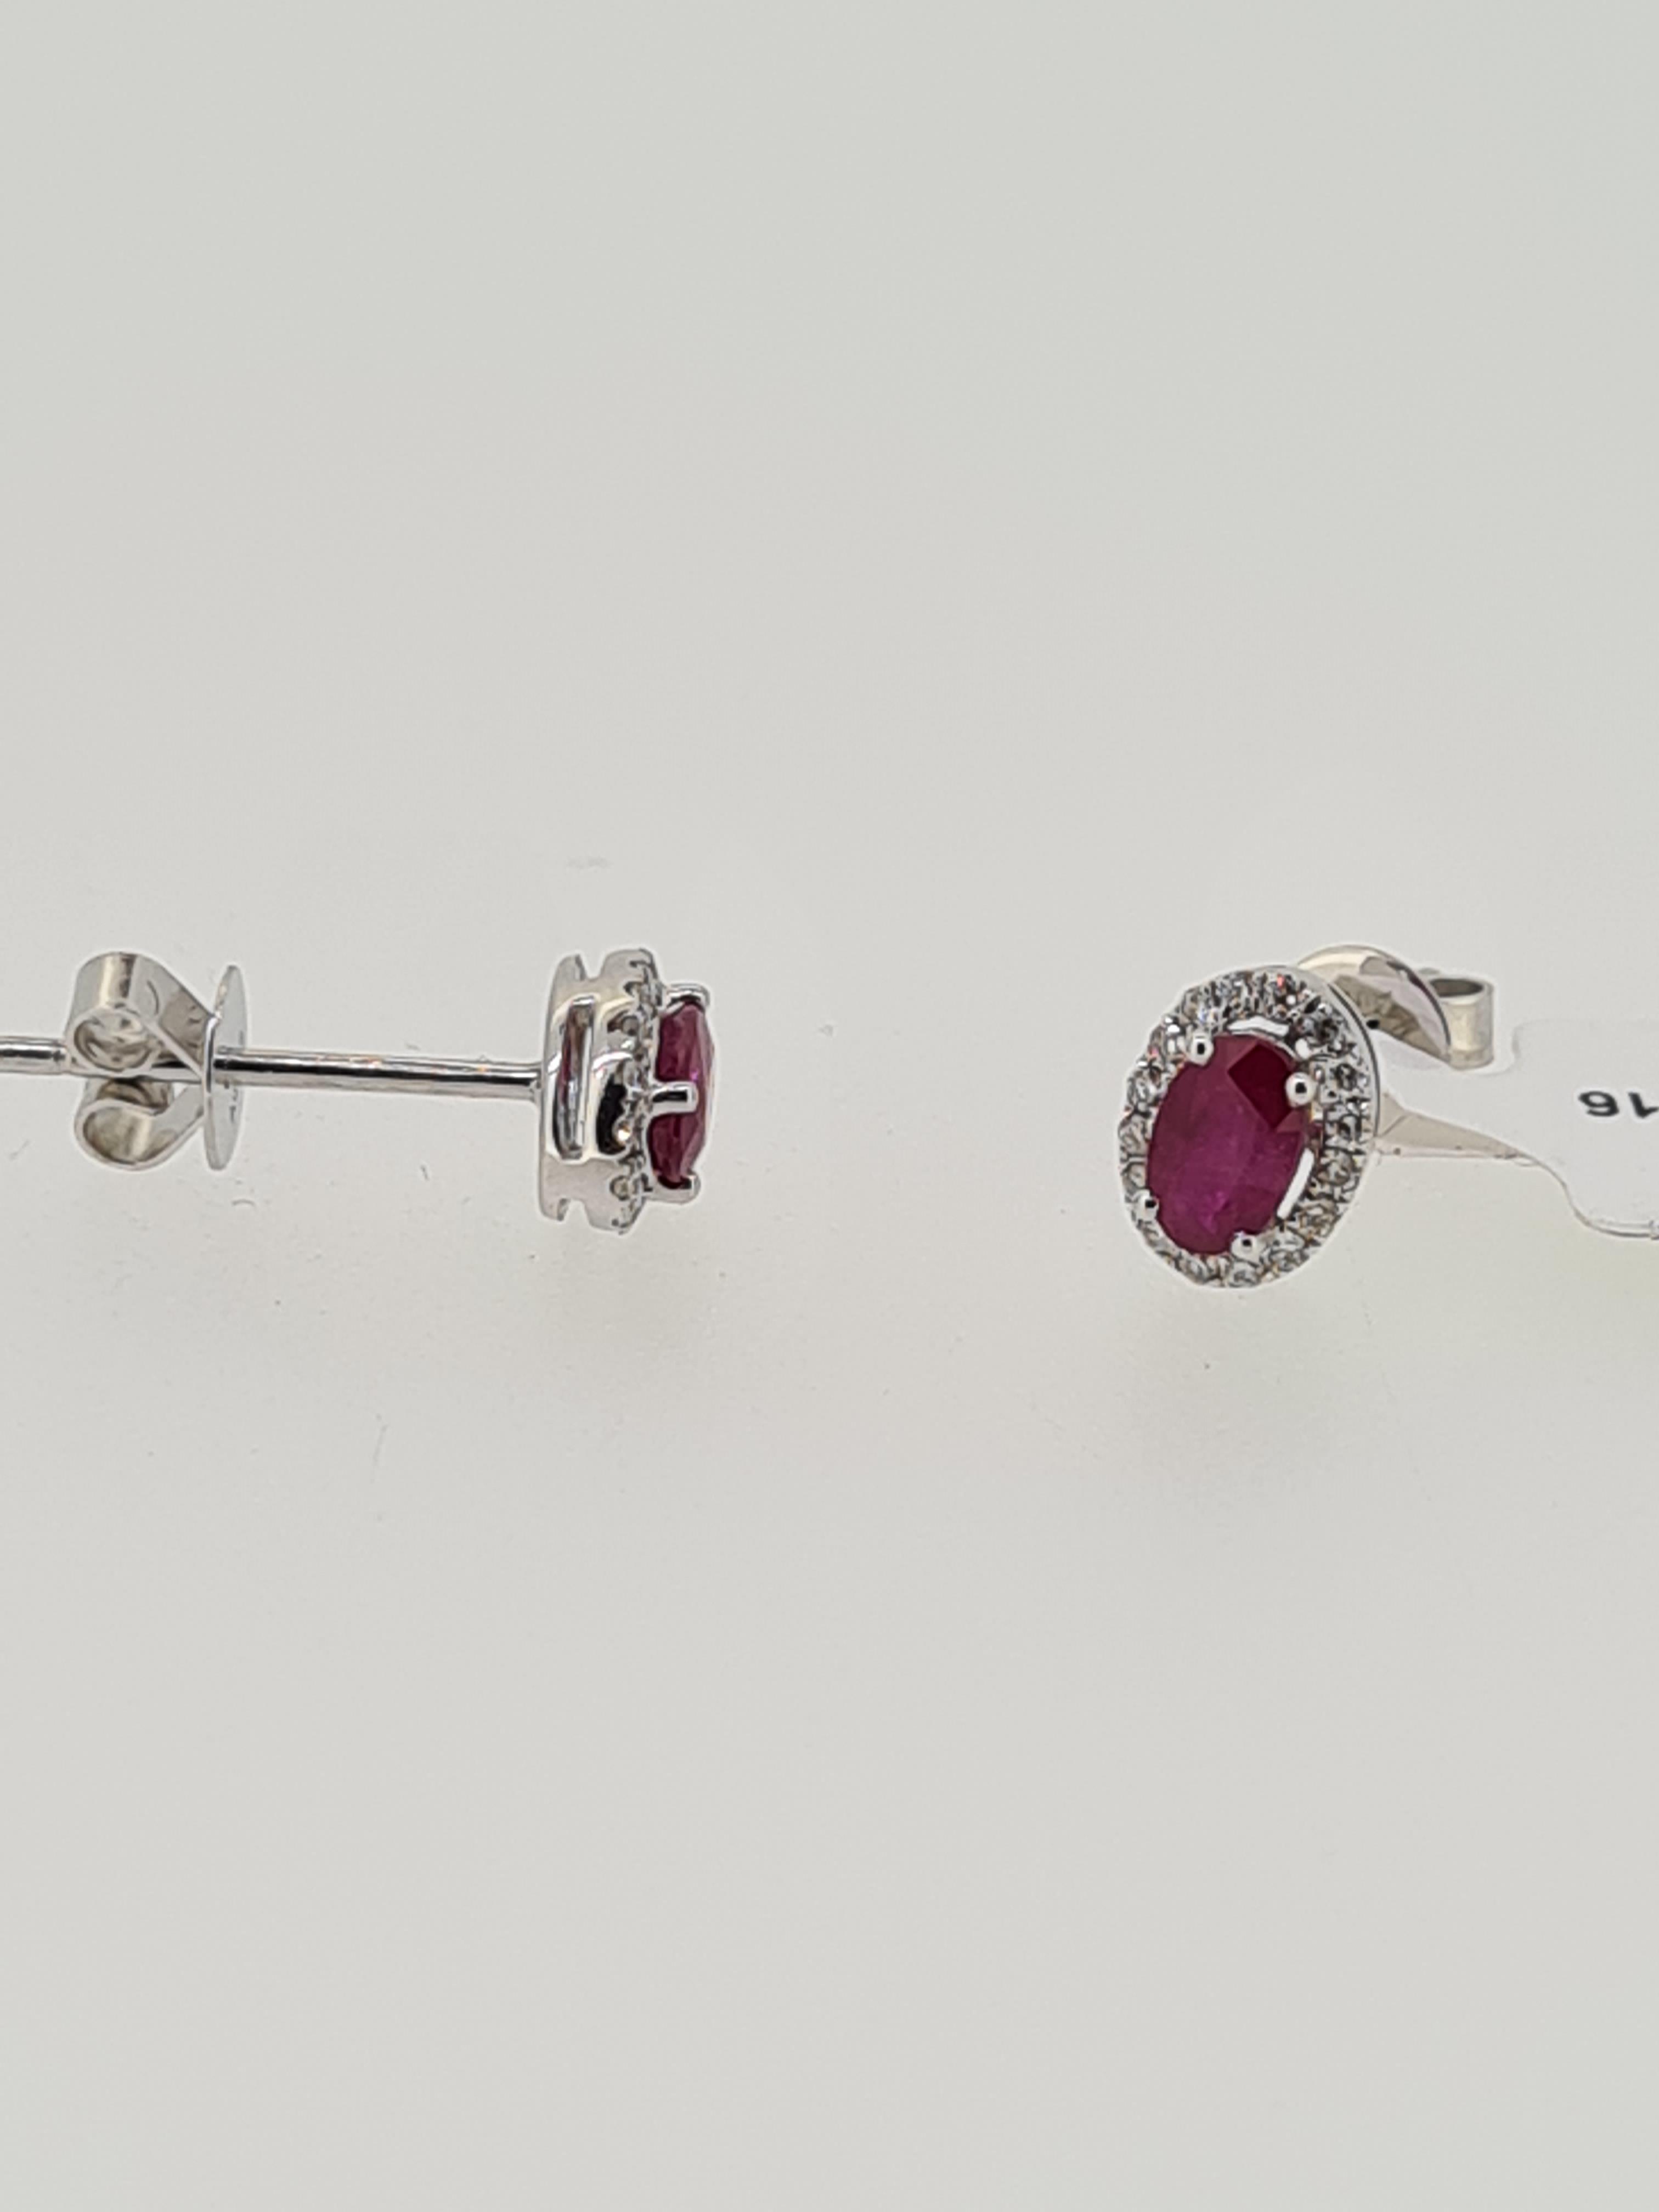 18ct white gold ruby and diamond stud earrings - Image 2 of 3